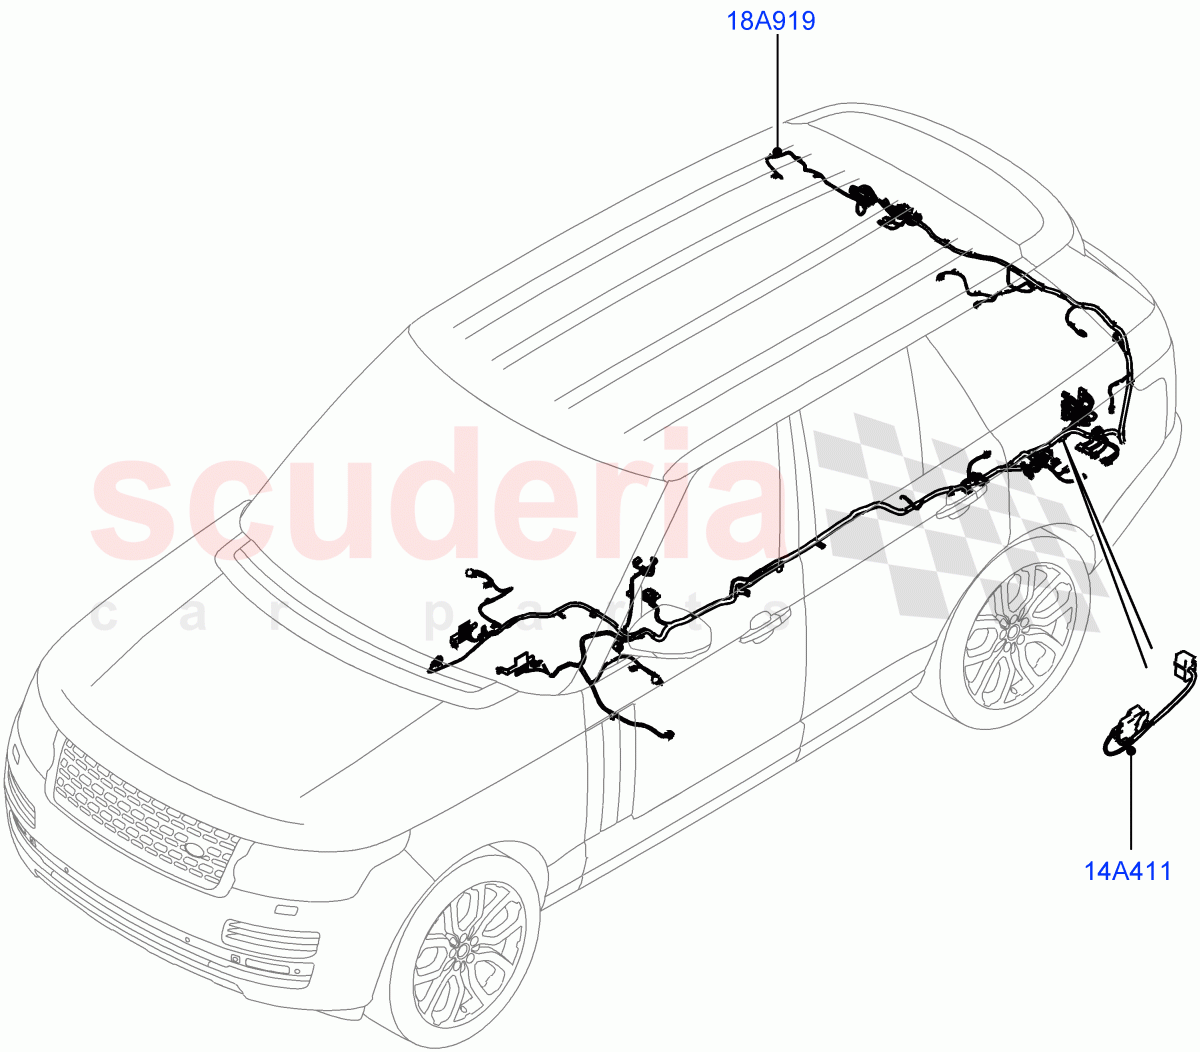 Electrical Wiring - Body And Rear(Audio/Navigation/Entertainment)((V)TOGA999999) of Land Rover Land Rover Range Rover (2012-2021) [5.0 OHC SGDI NA V8 Petrol]